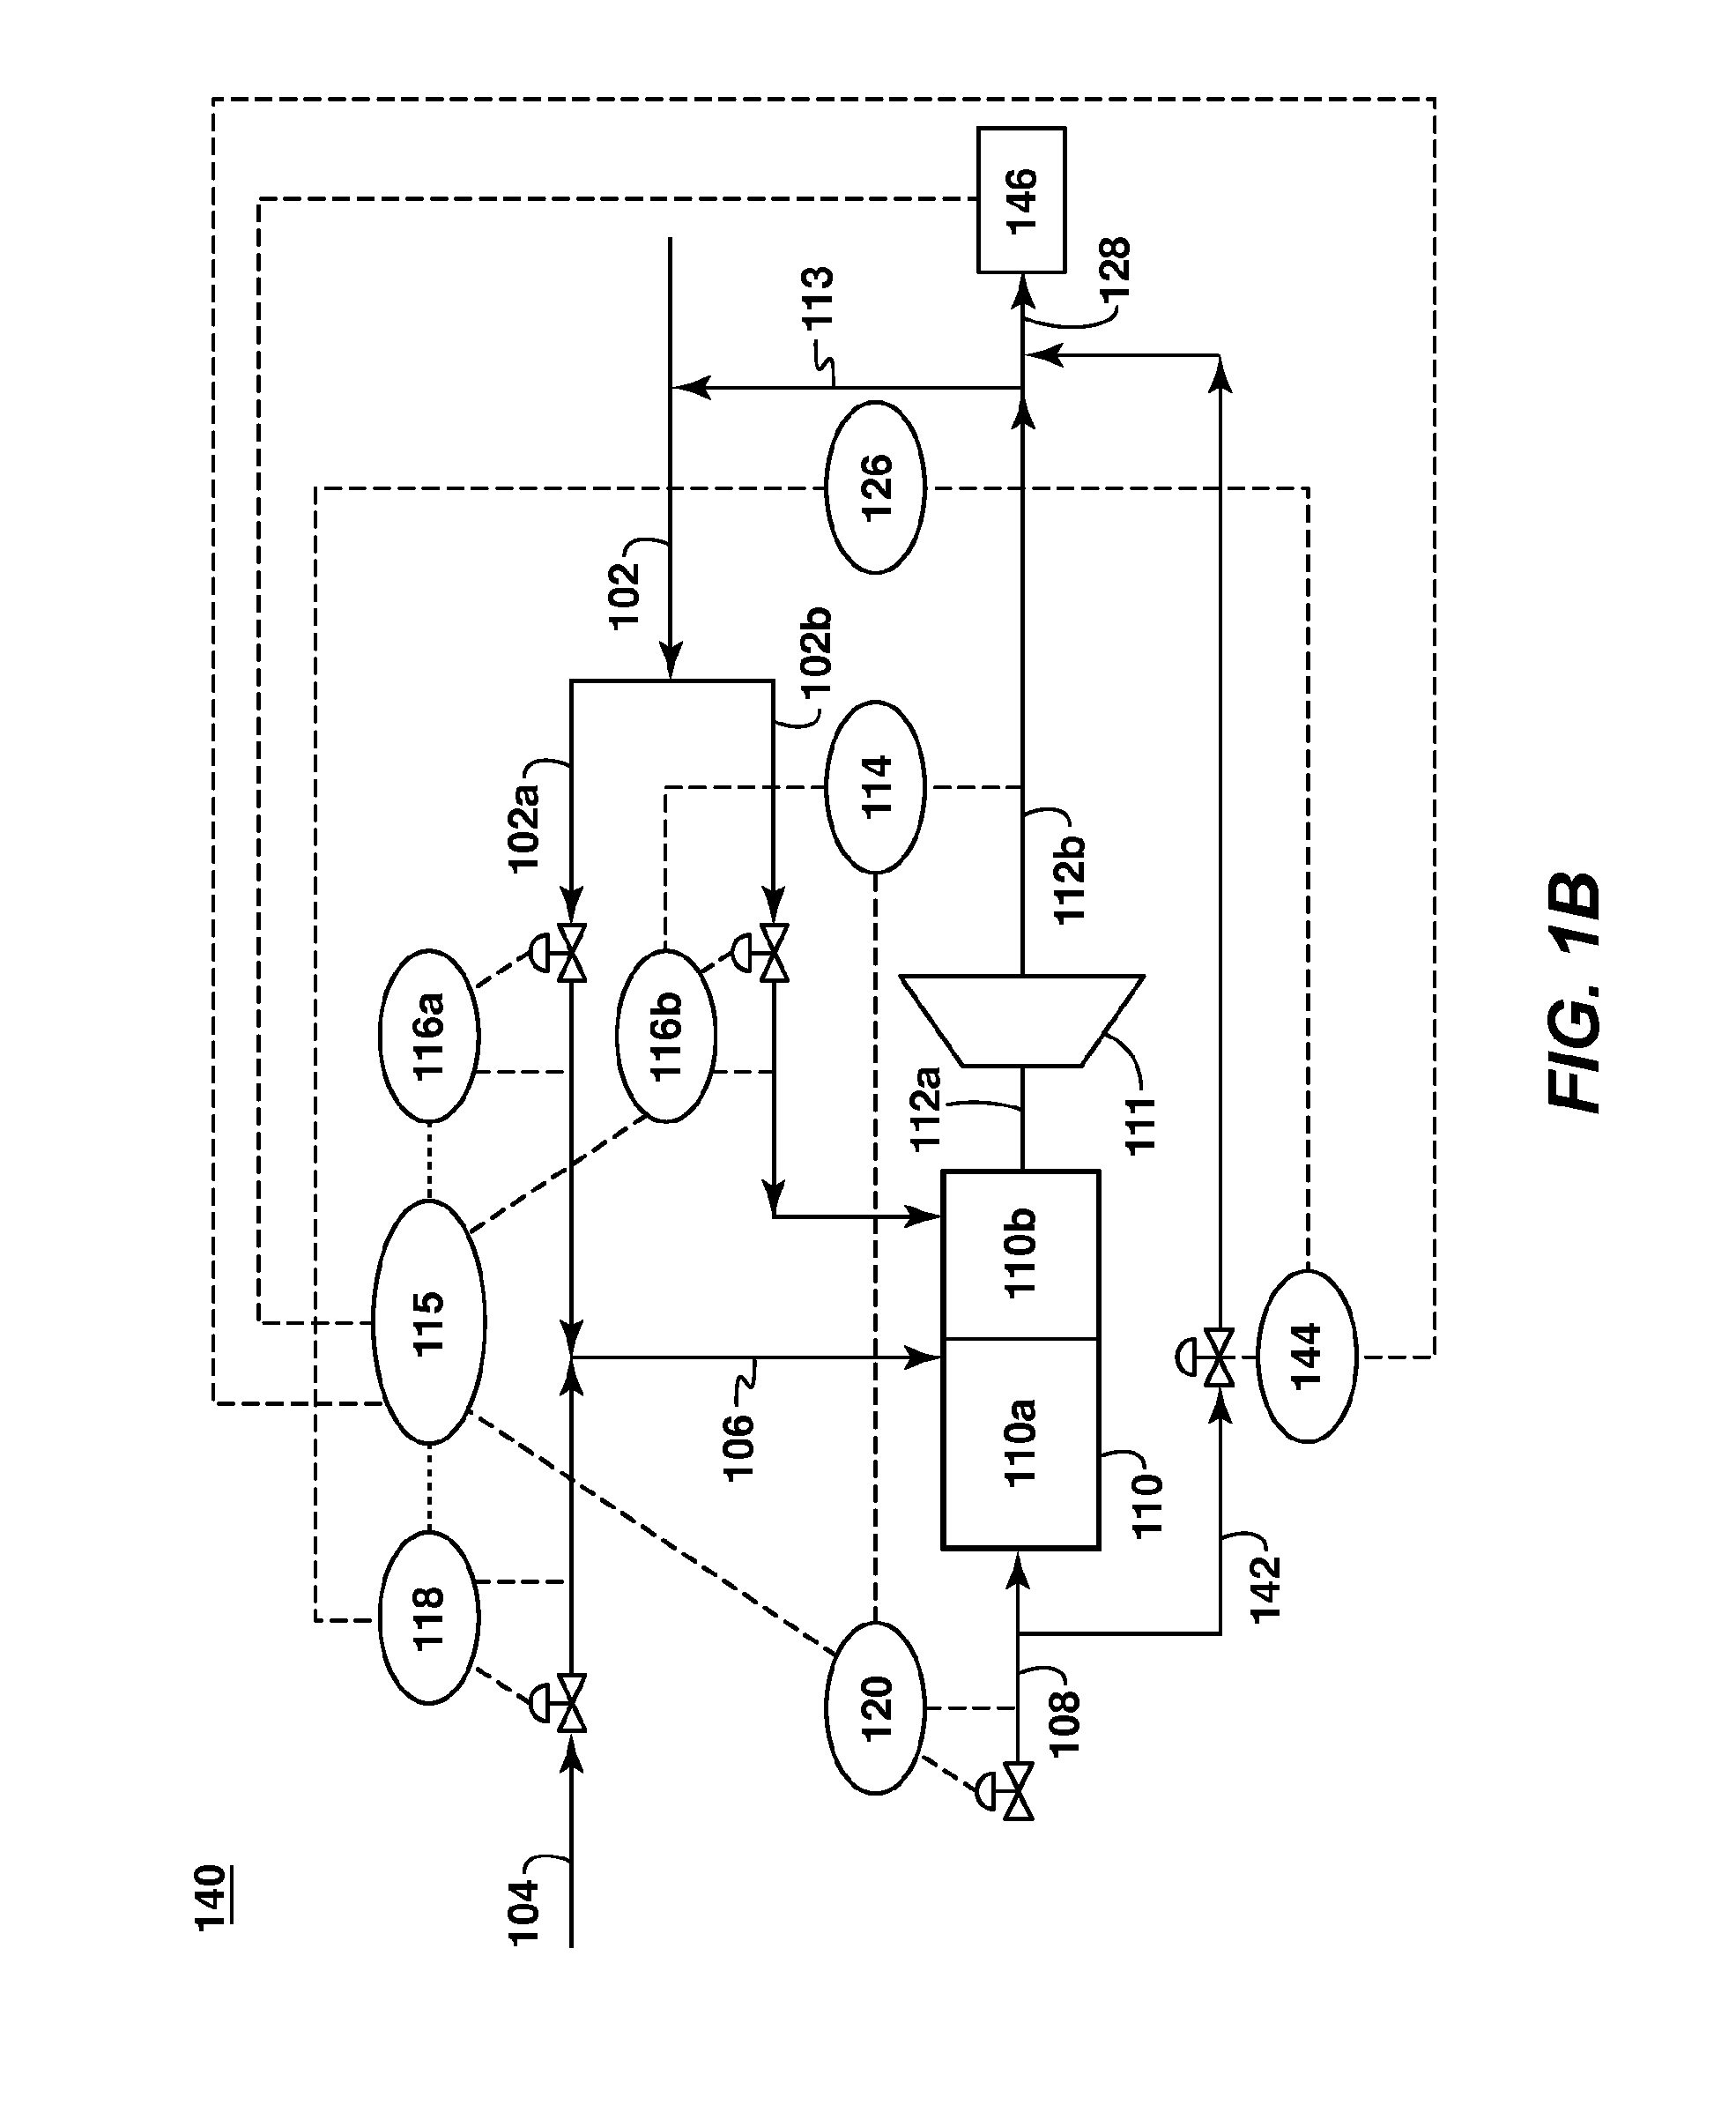 Methods and Systems For Controlling The Products of Combustion